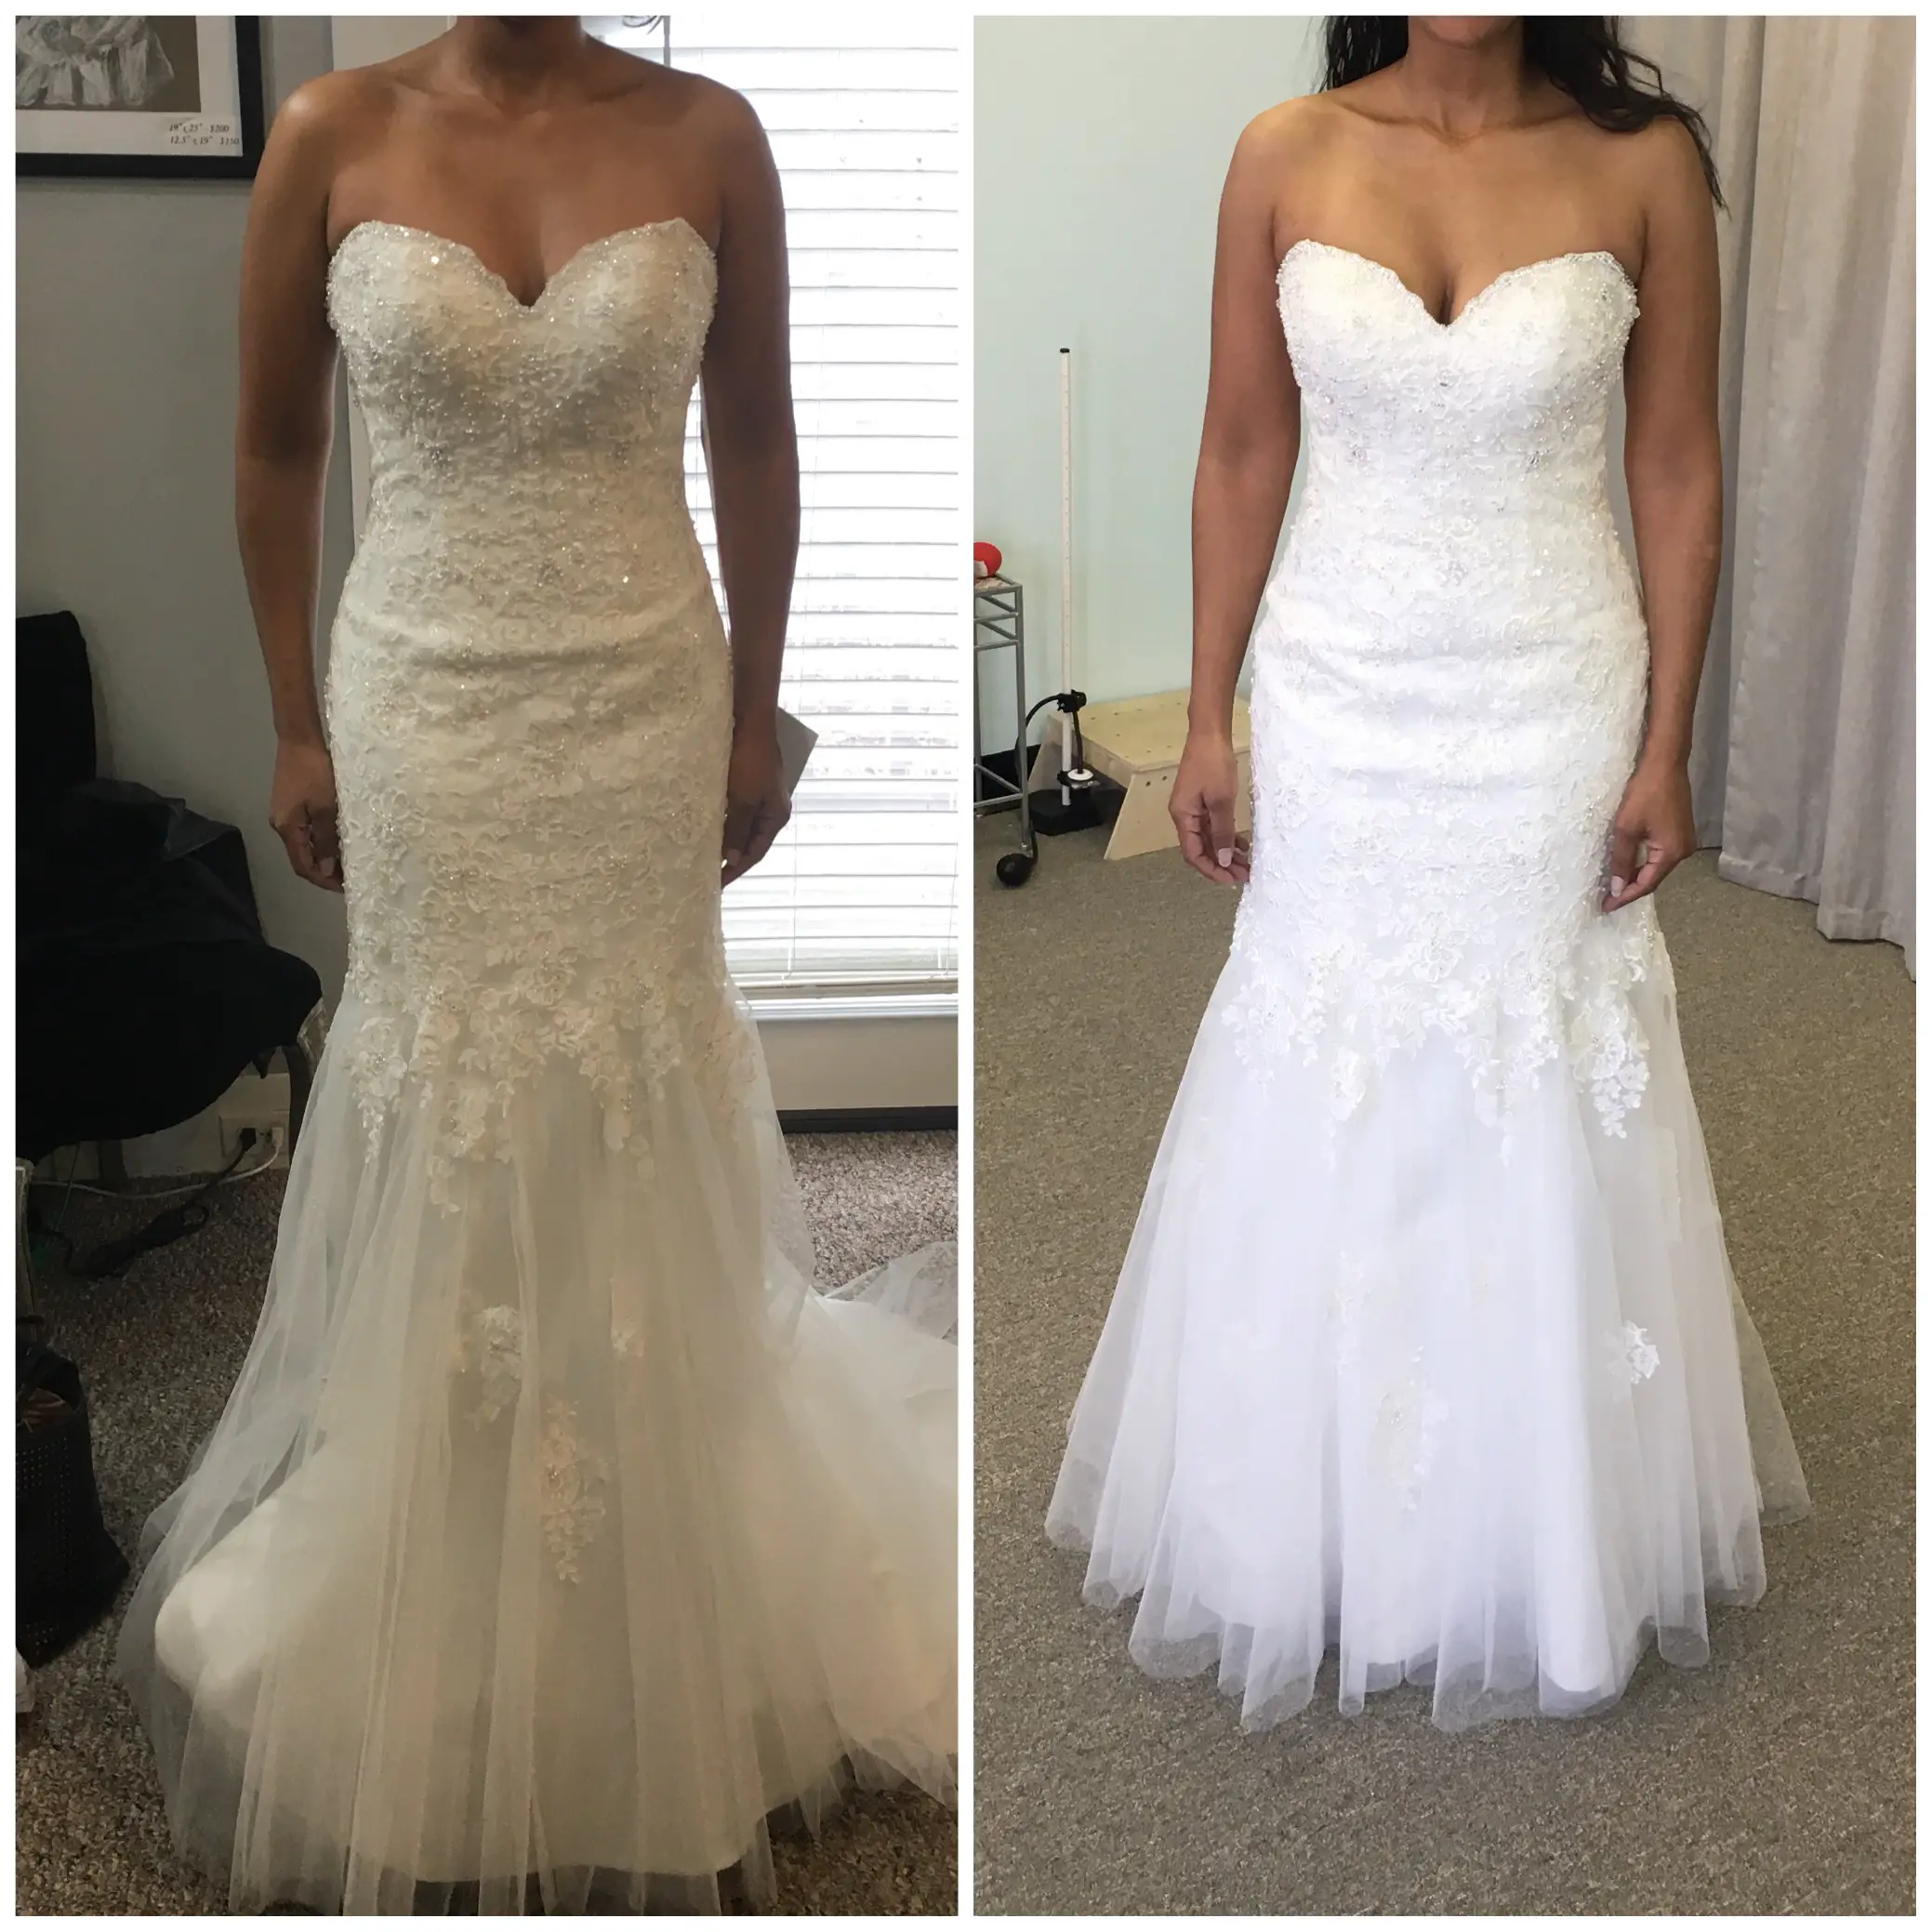 Wedding Dress Alterations Before And After